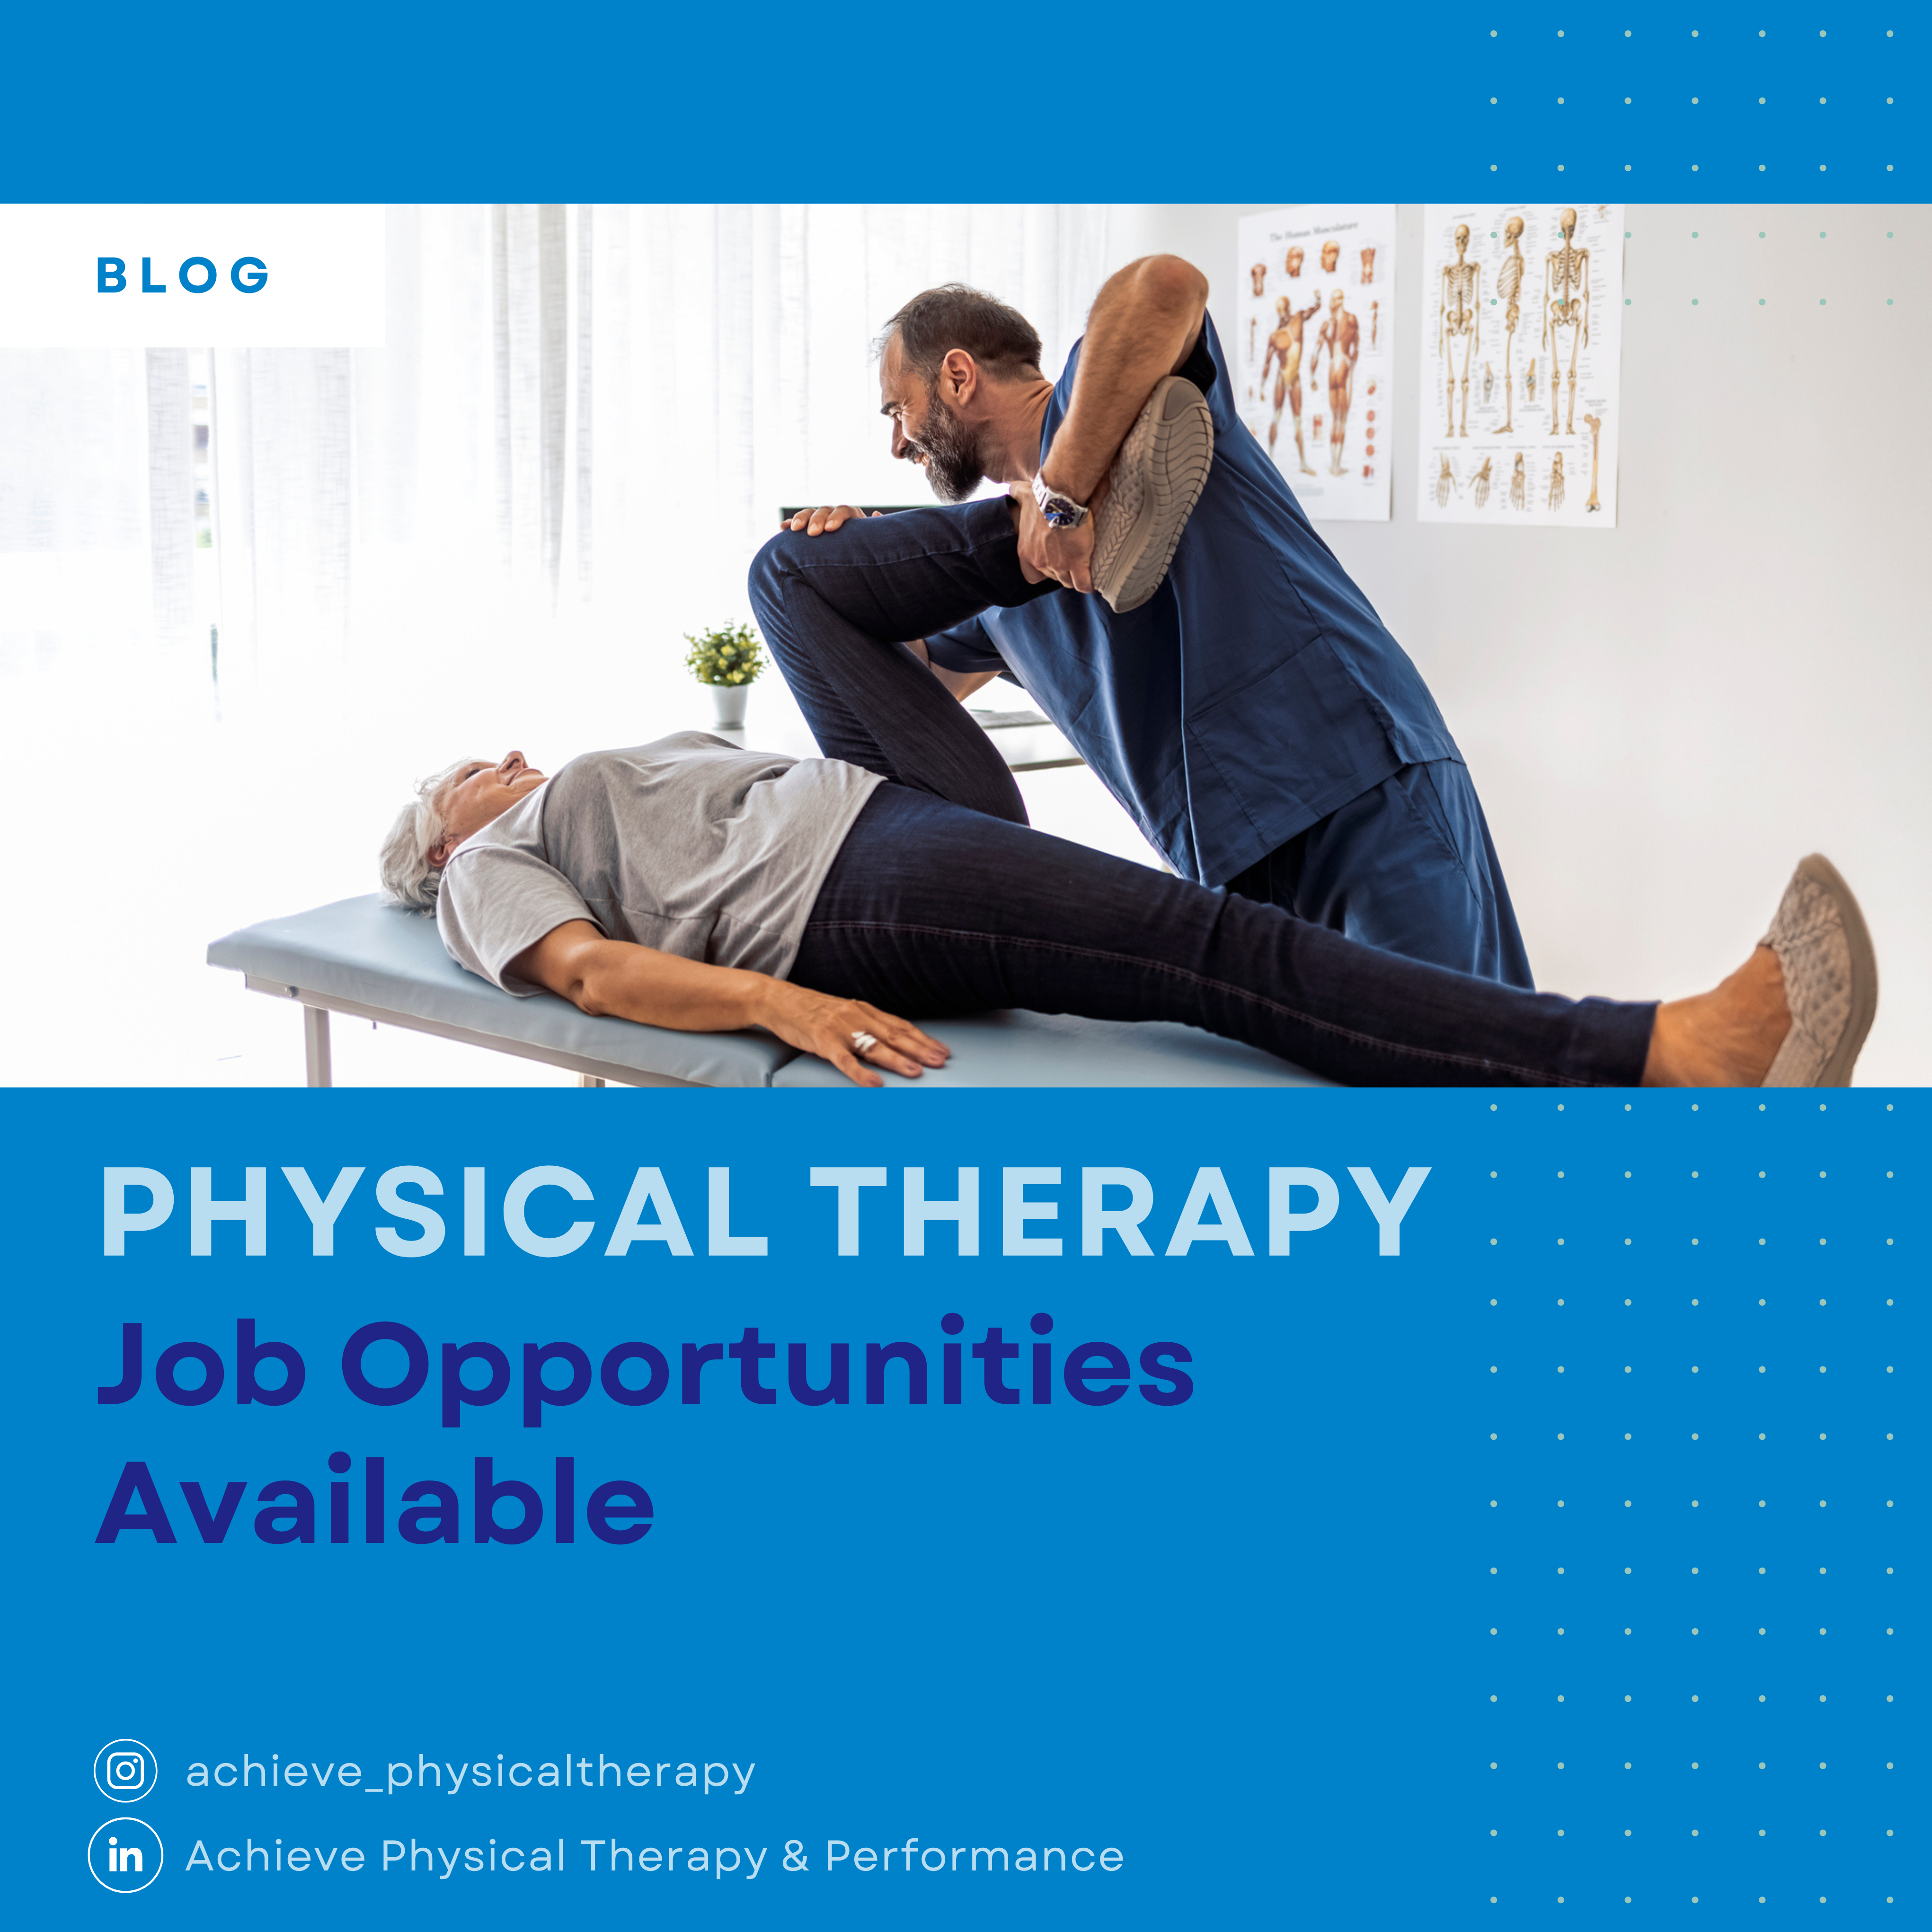 Physical Therapy Jobs Available